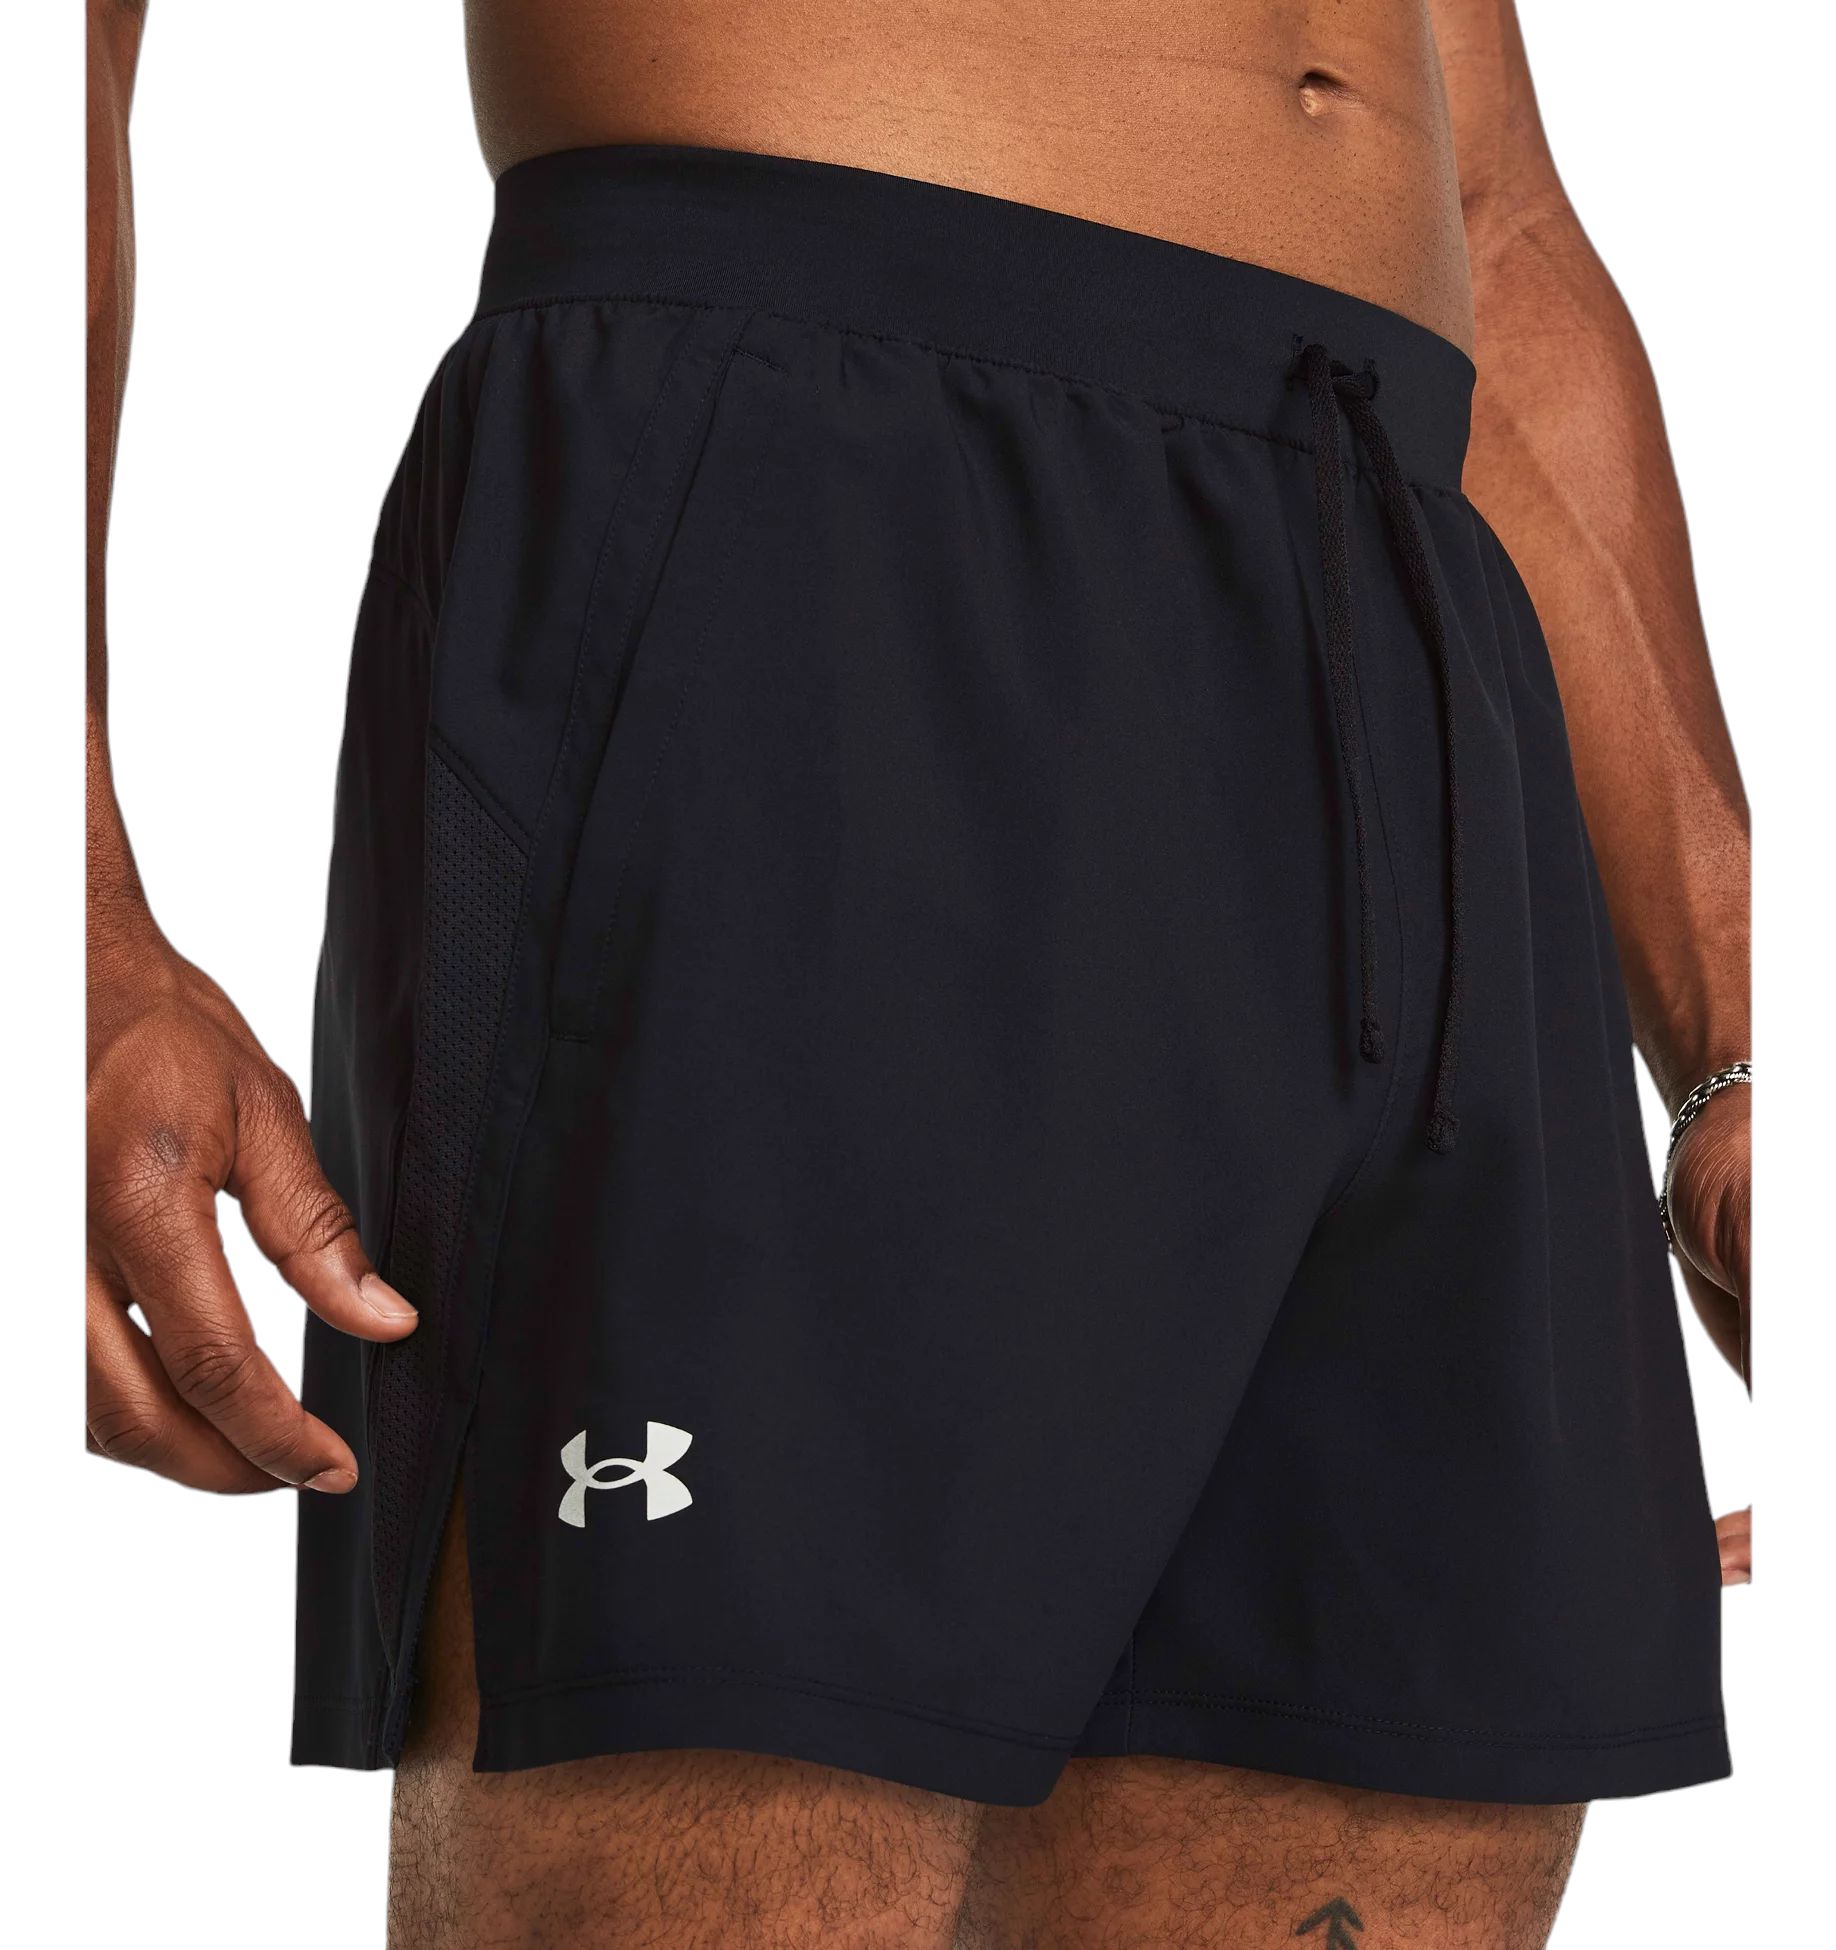 Men's Launch Unlined 5IN Shorts Black/Reflective 